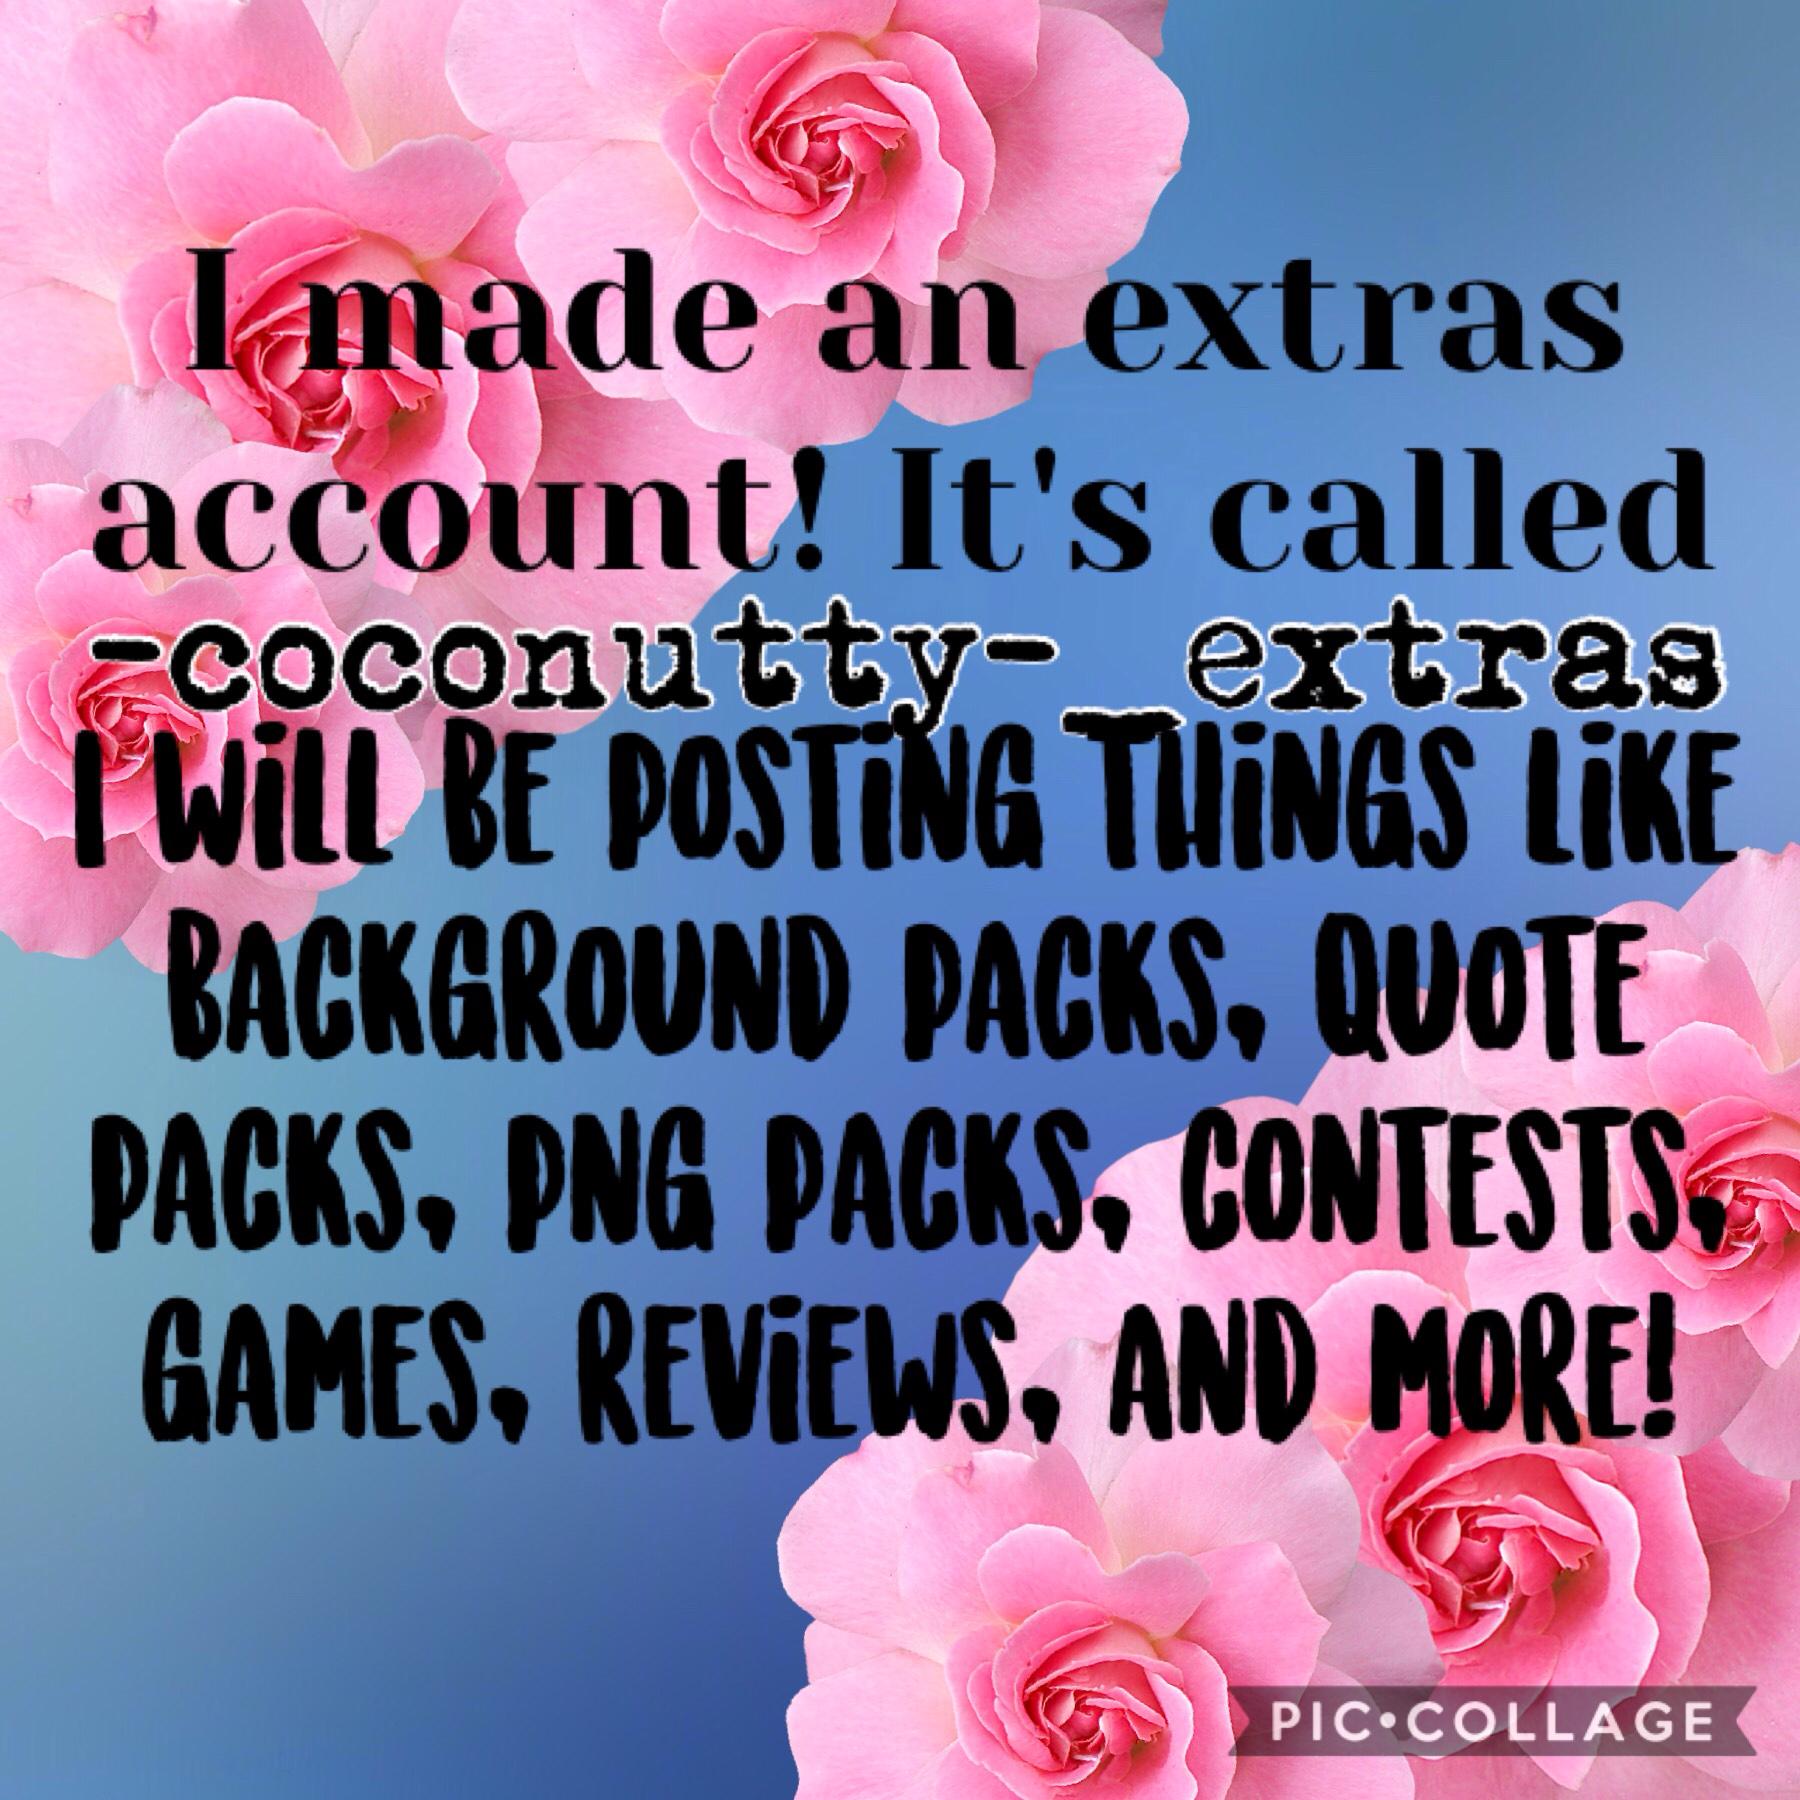 I made an extras account! I'll be posting background/quote/png packs, contests, games, reviews, and more. YAY!